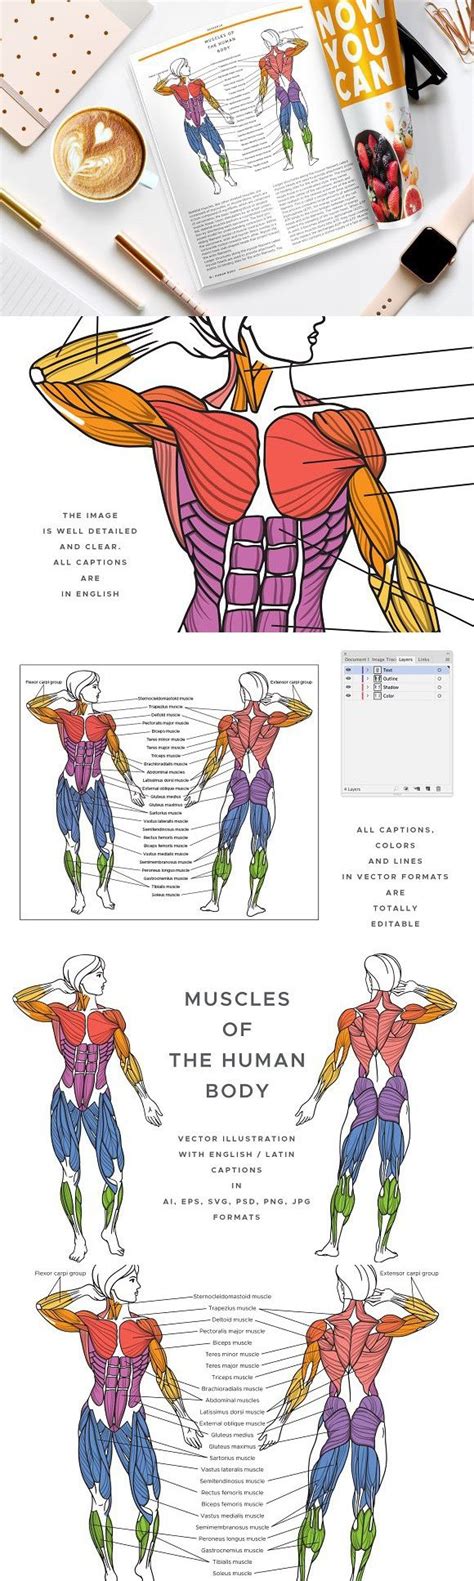 The muscles of your body which you can work out can broadly be divided into two categories in the upper body muscles you have shoulder (deltoids and traps), back (lats, middle back and lower back). Muscles Of The Human Body | Human muscular system, Human body, Human